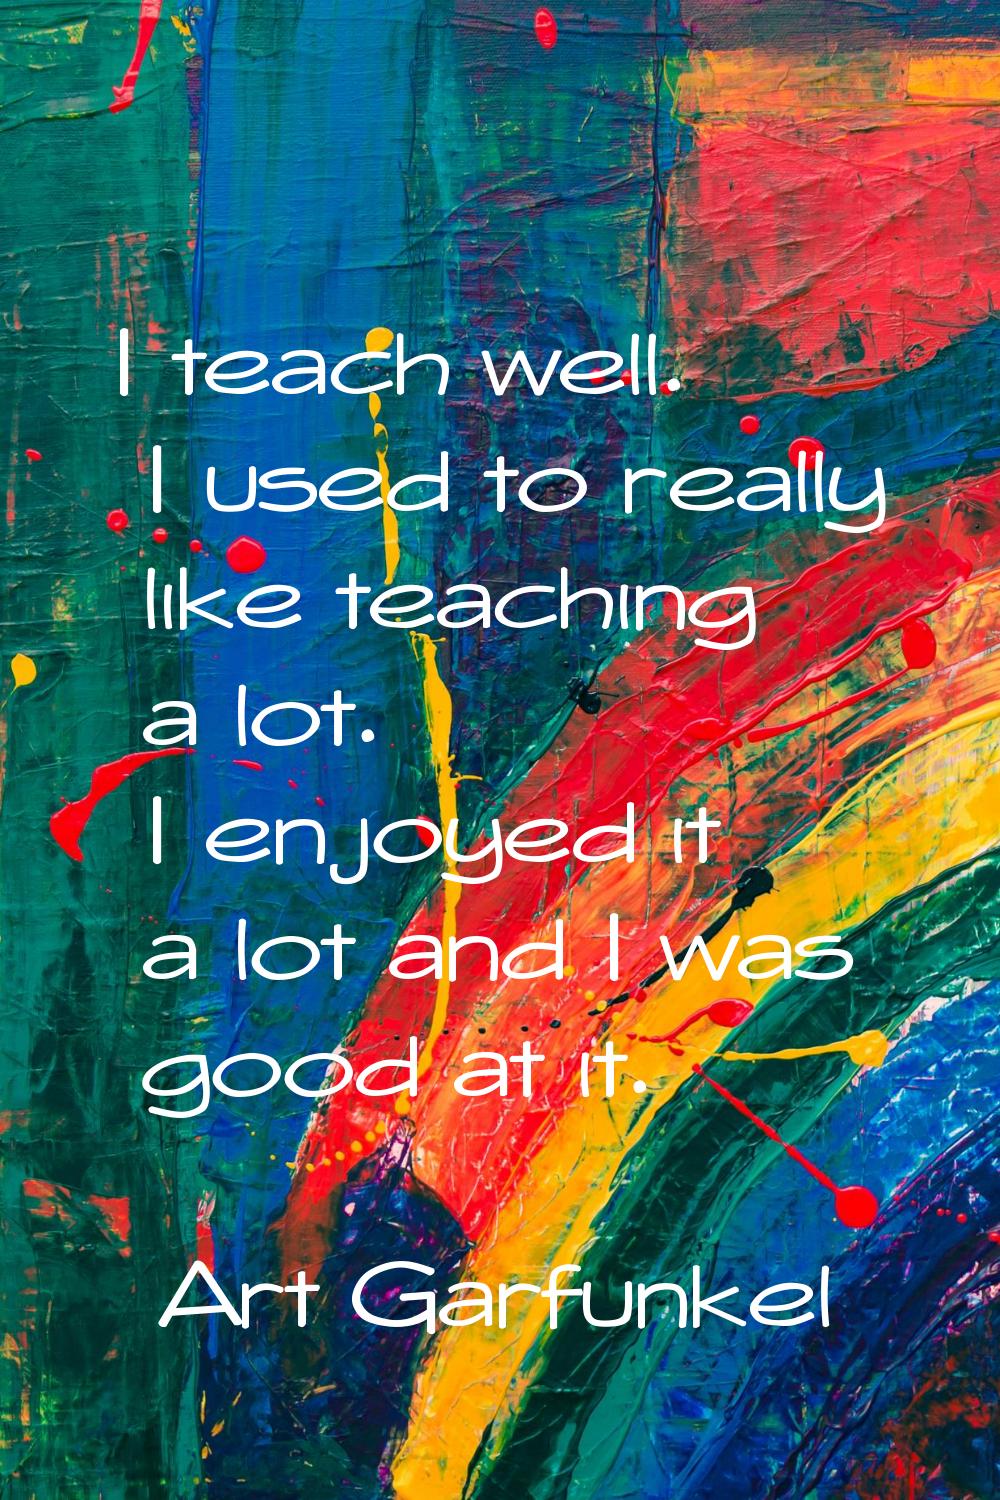 I teach well. I used to really like teaching a lot. I enjoyed it a lot and I was good at it.